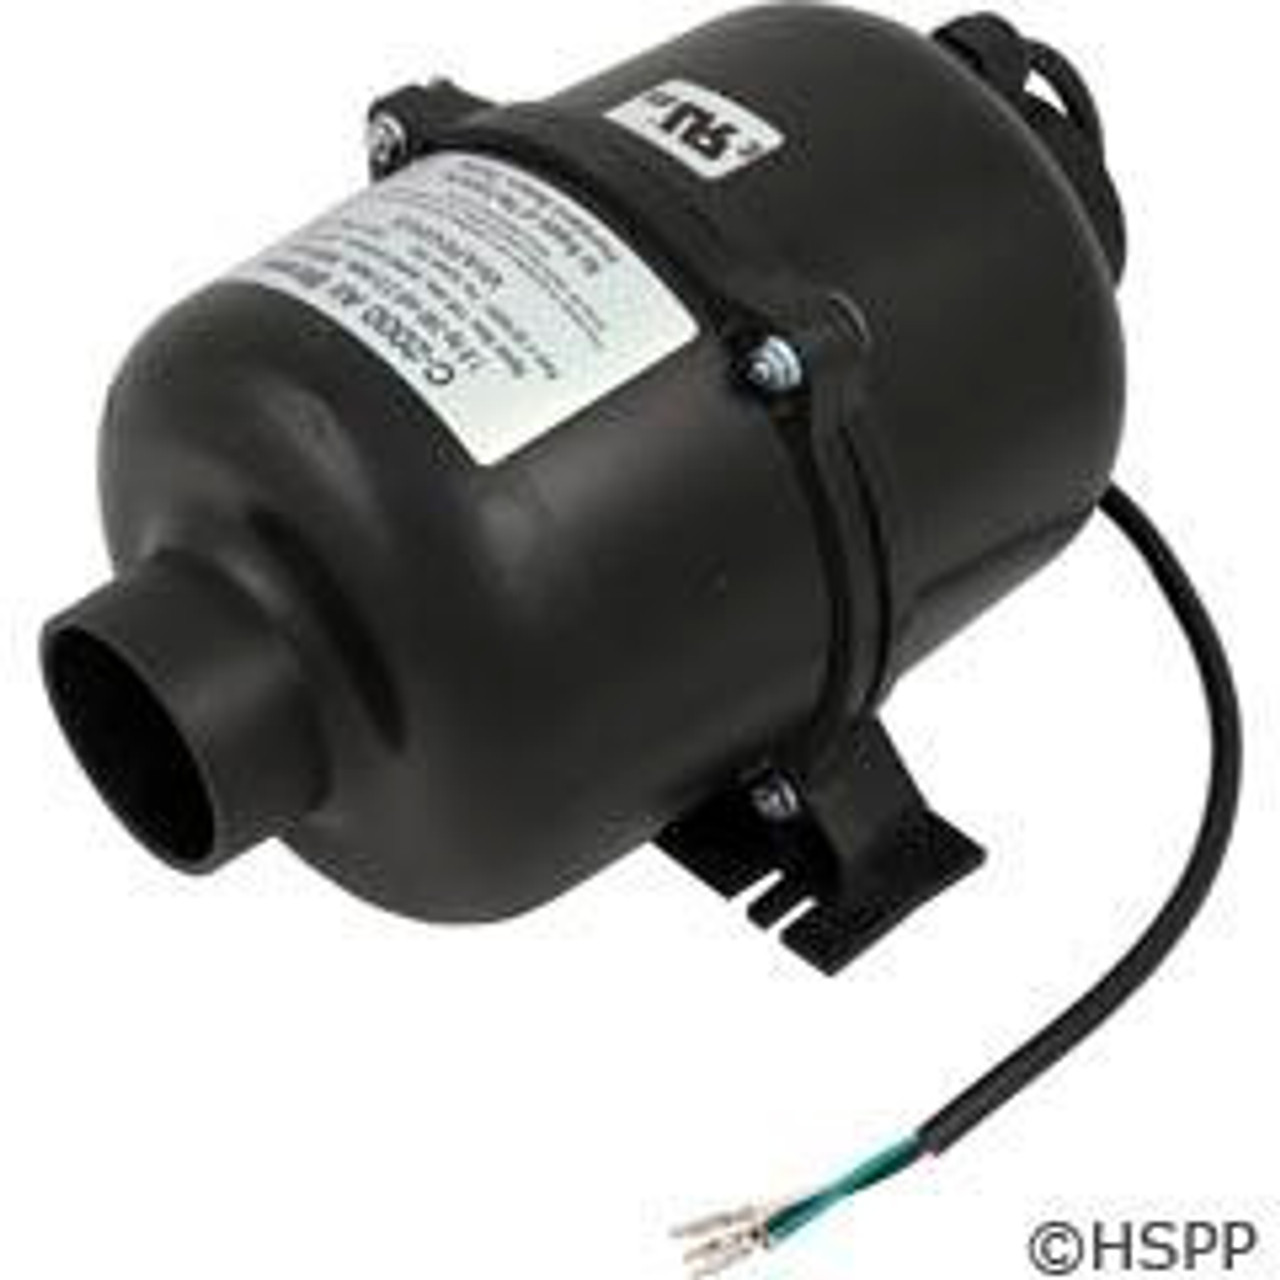 Blower, Air Supply Comet 2000, 1.0hp, 230v, 2.5A, 4ft AMP